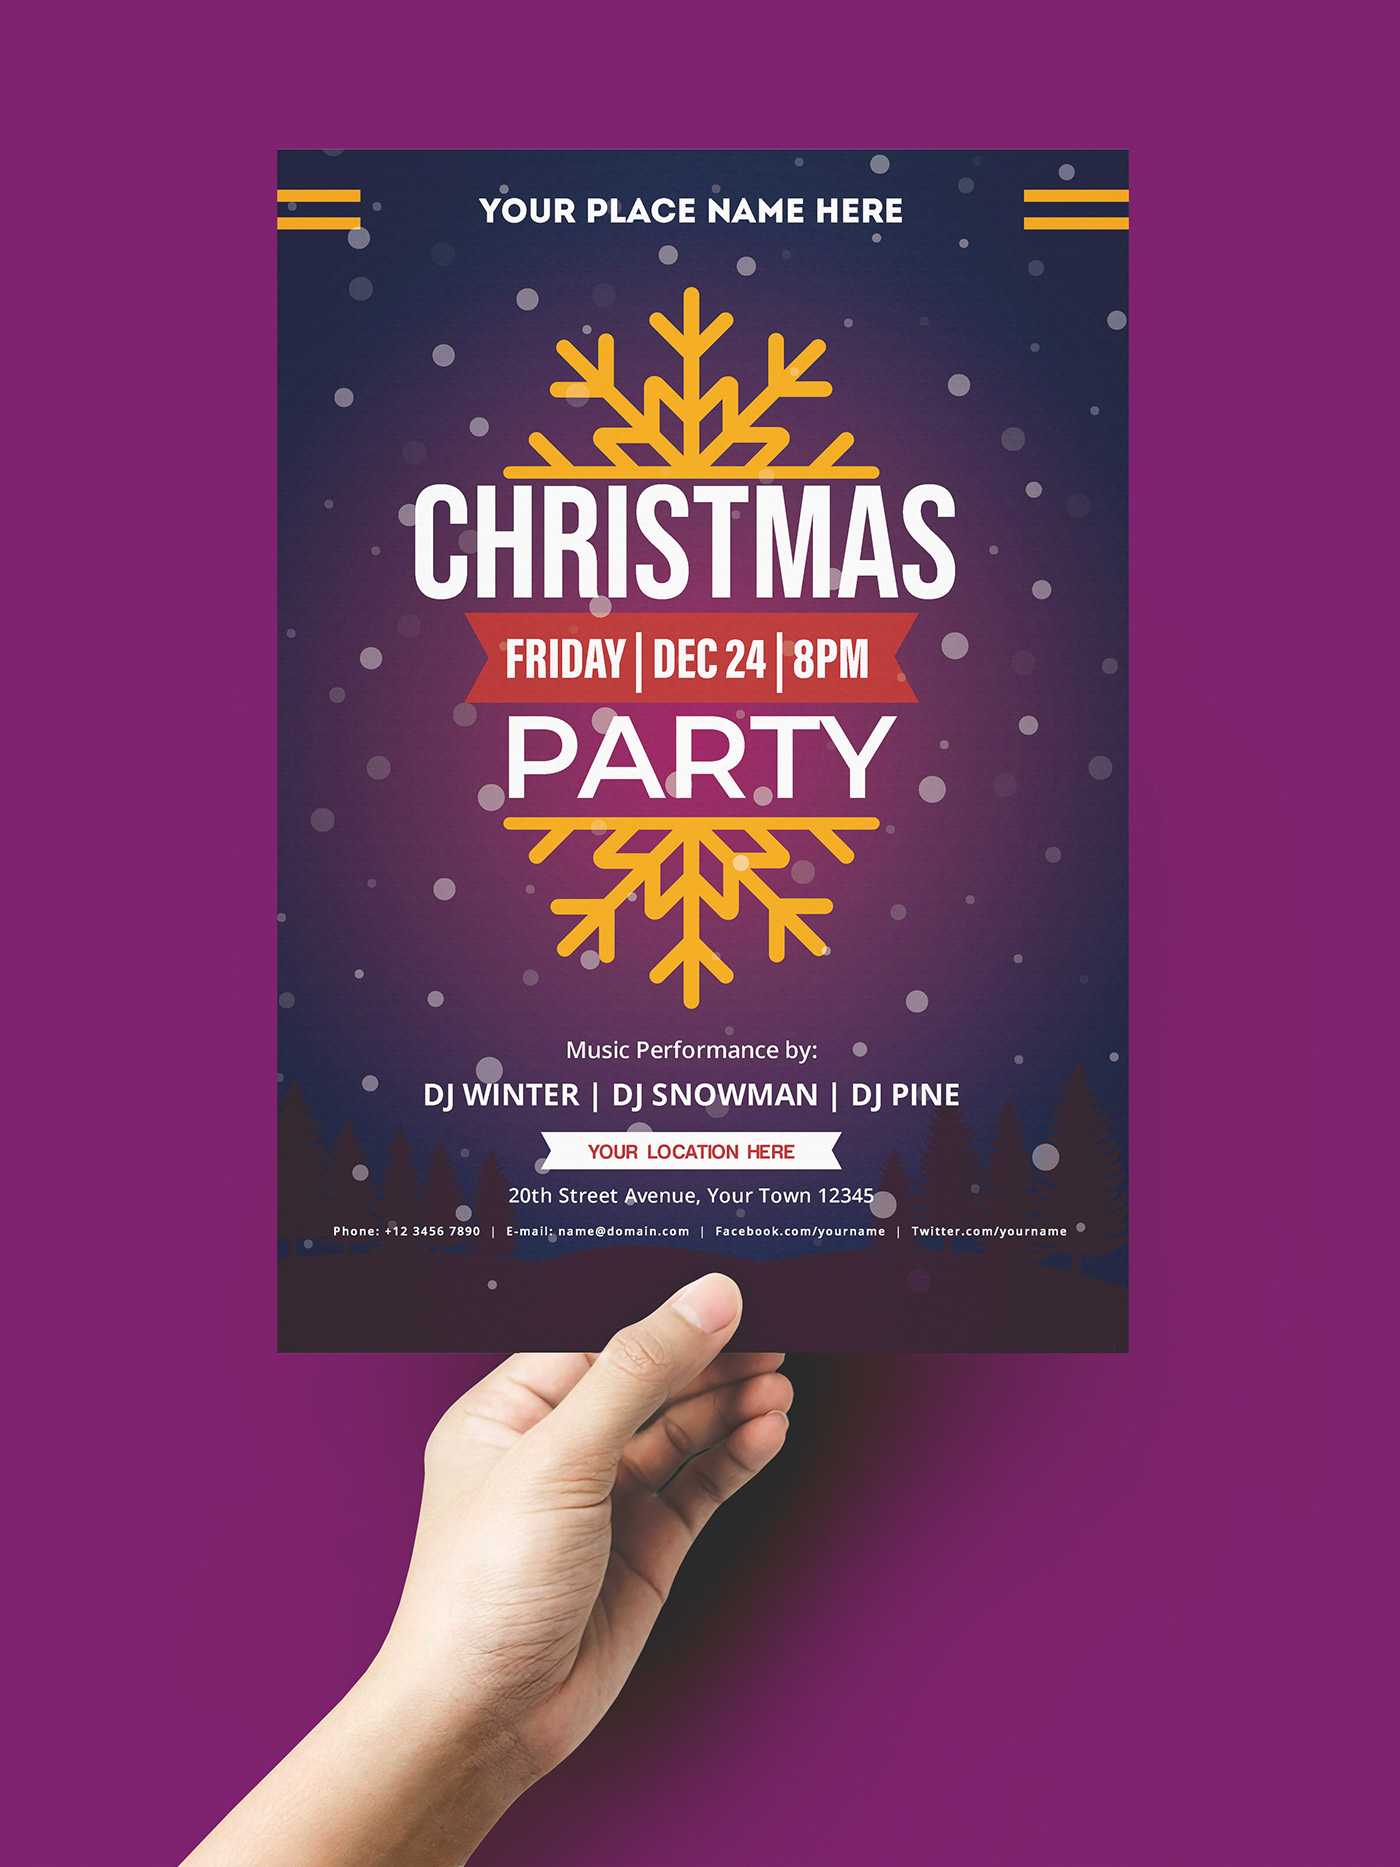 Flyers are usually printed on both sides and contain information 
about a product or event. They are